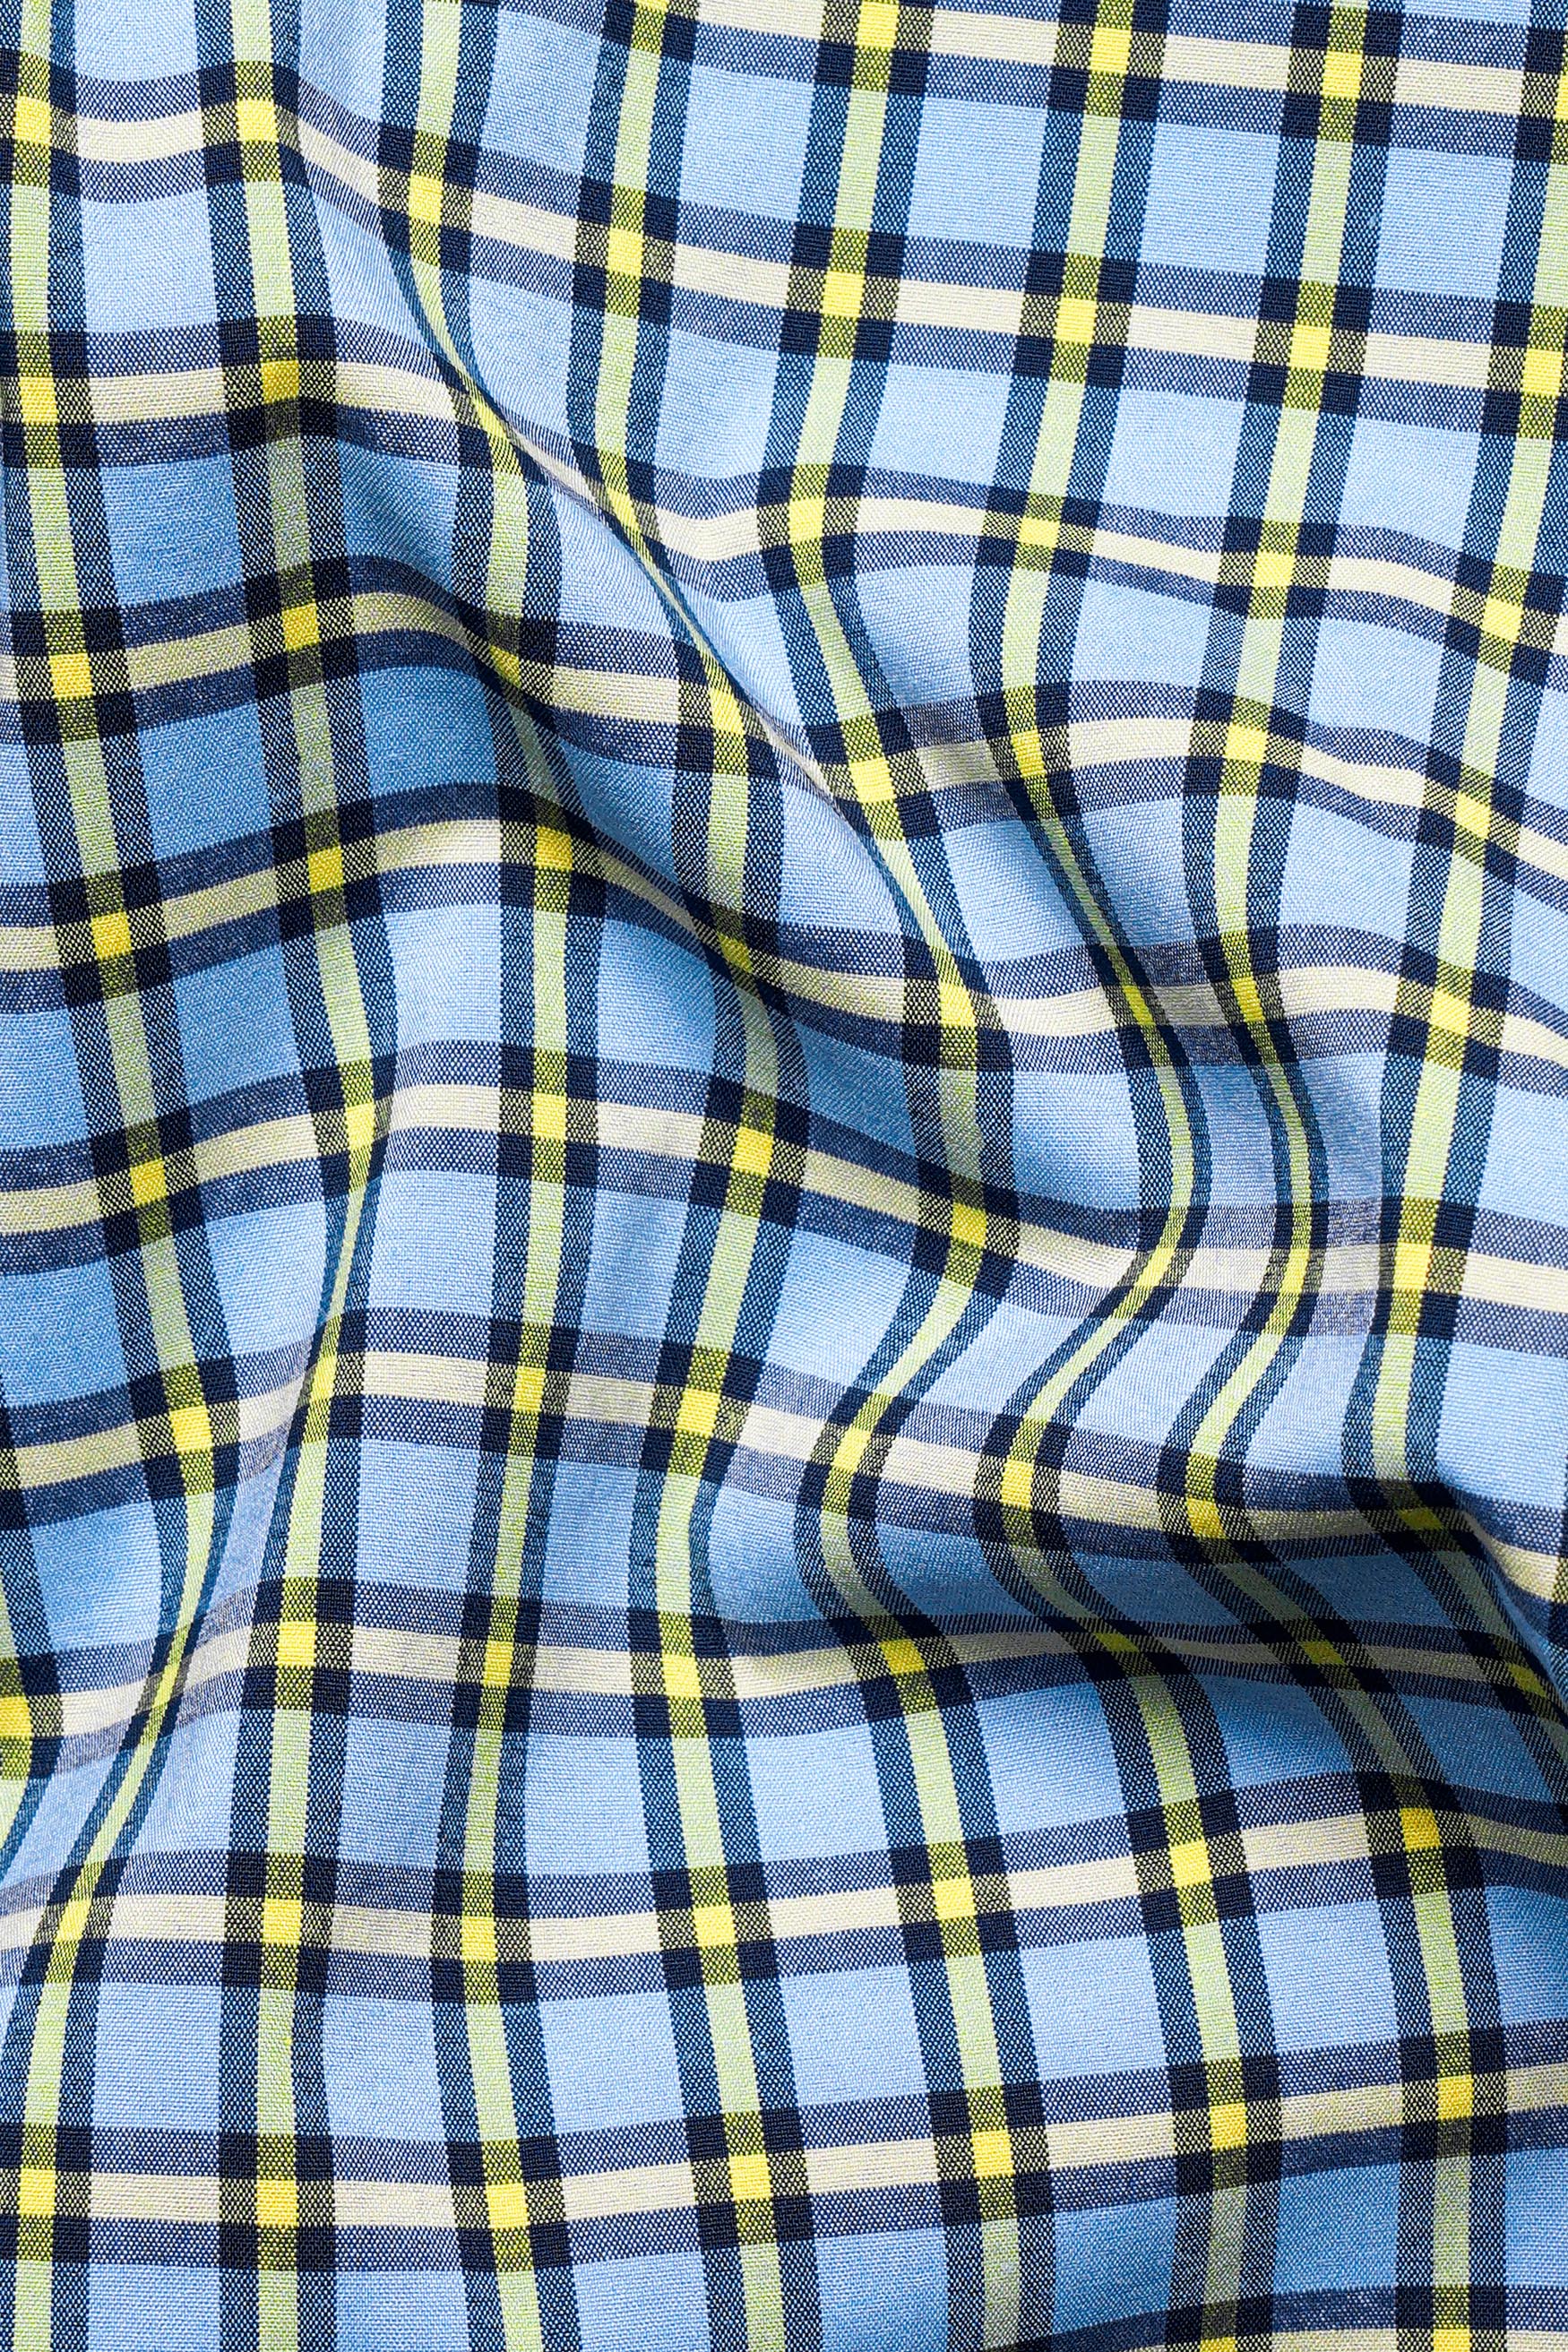 Jordy Blue and Jasmine Yellow Checkered Premium Cotton Shirt 11680-BLE-38, 11680-BLE-H-38, 11680-BLE-39, 11680-BLE-H-39, 11680-BLE-40, 11680-BLE-H-40, 11680-BLE-42, 11680-BLE-H-42, 11680-BLE-44, 11680-BLE-H-44, 11680-BLE-46, 11680-BLE-H-46, 11680-BLE-48, 11680-BLE-H-48, 11680-BLE-50, 11680-BLE-H-50, 11680-BLE-52, 11680-BLE-H-52